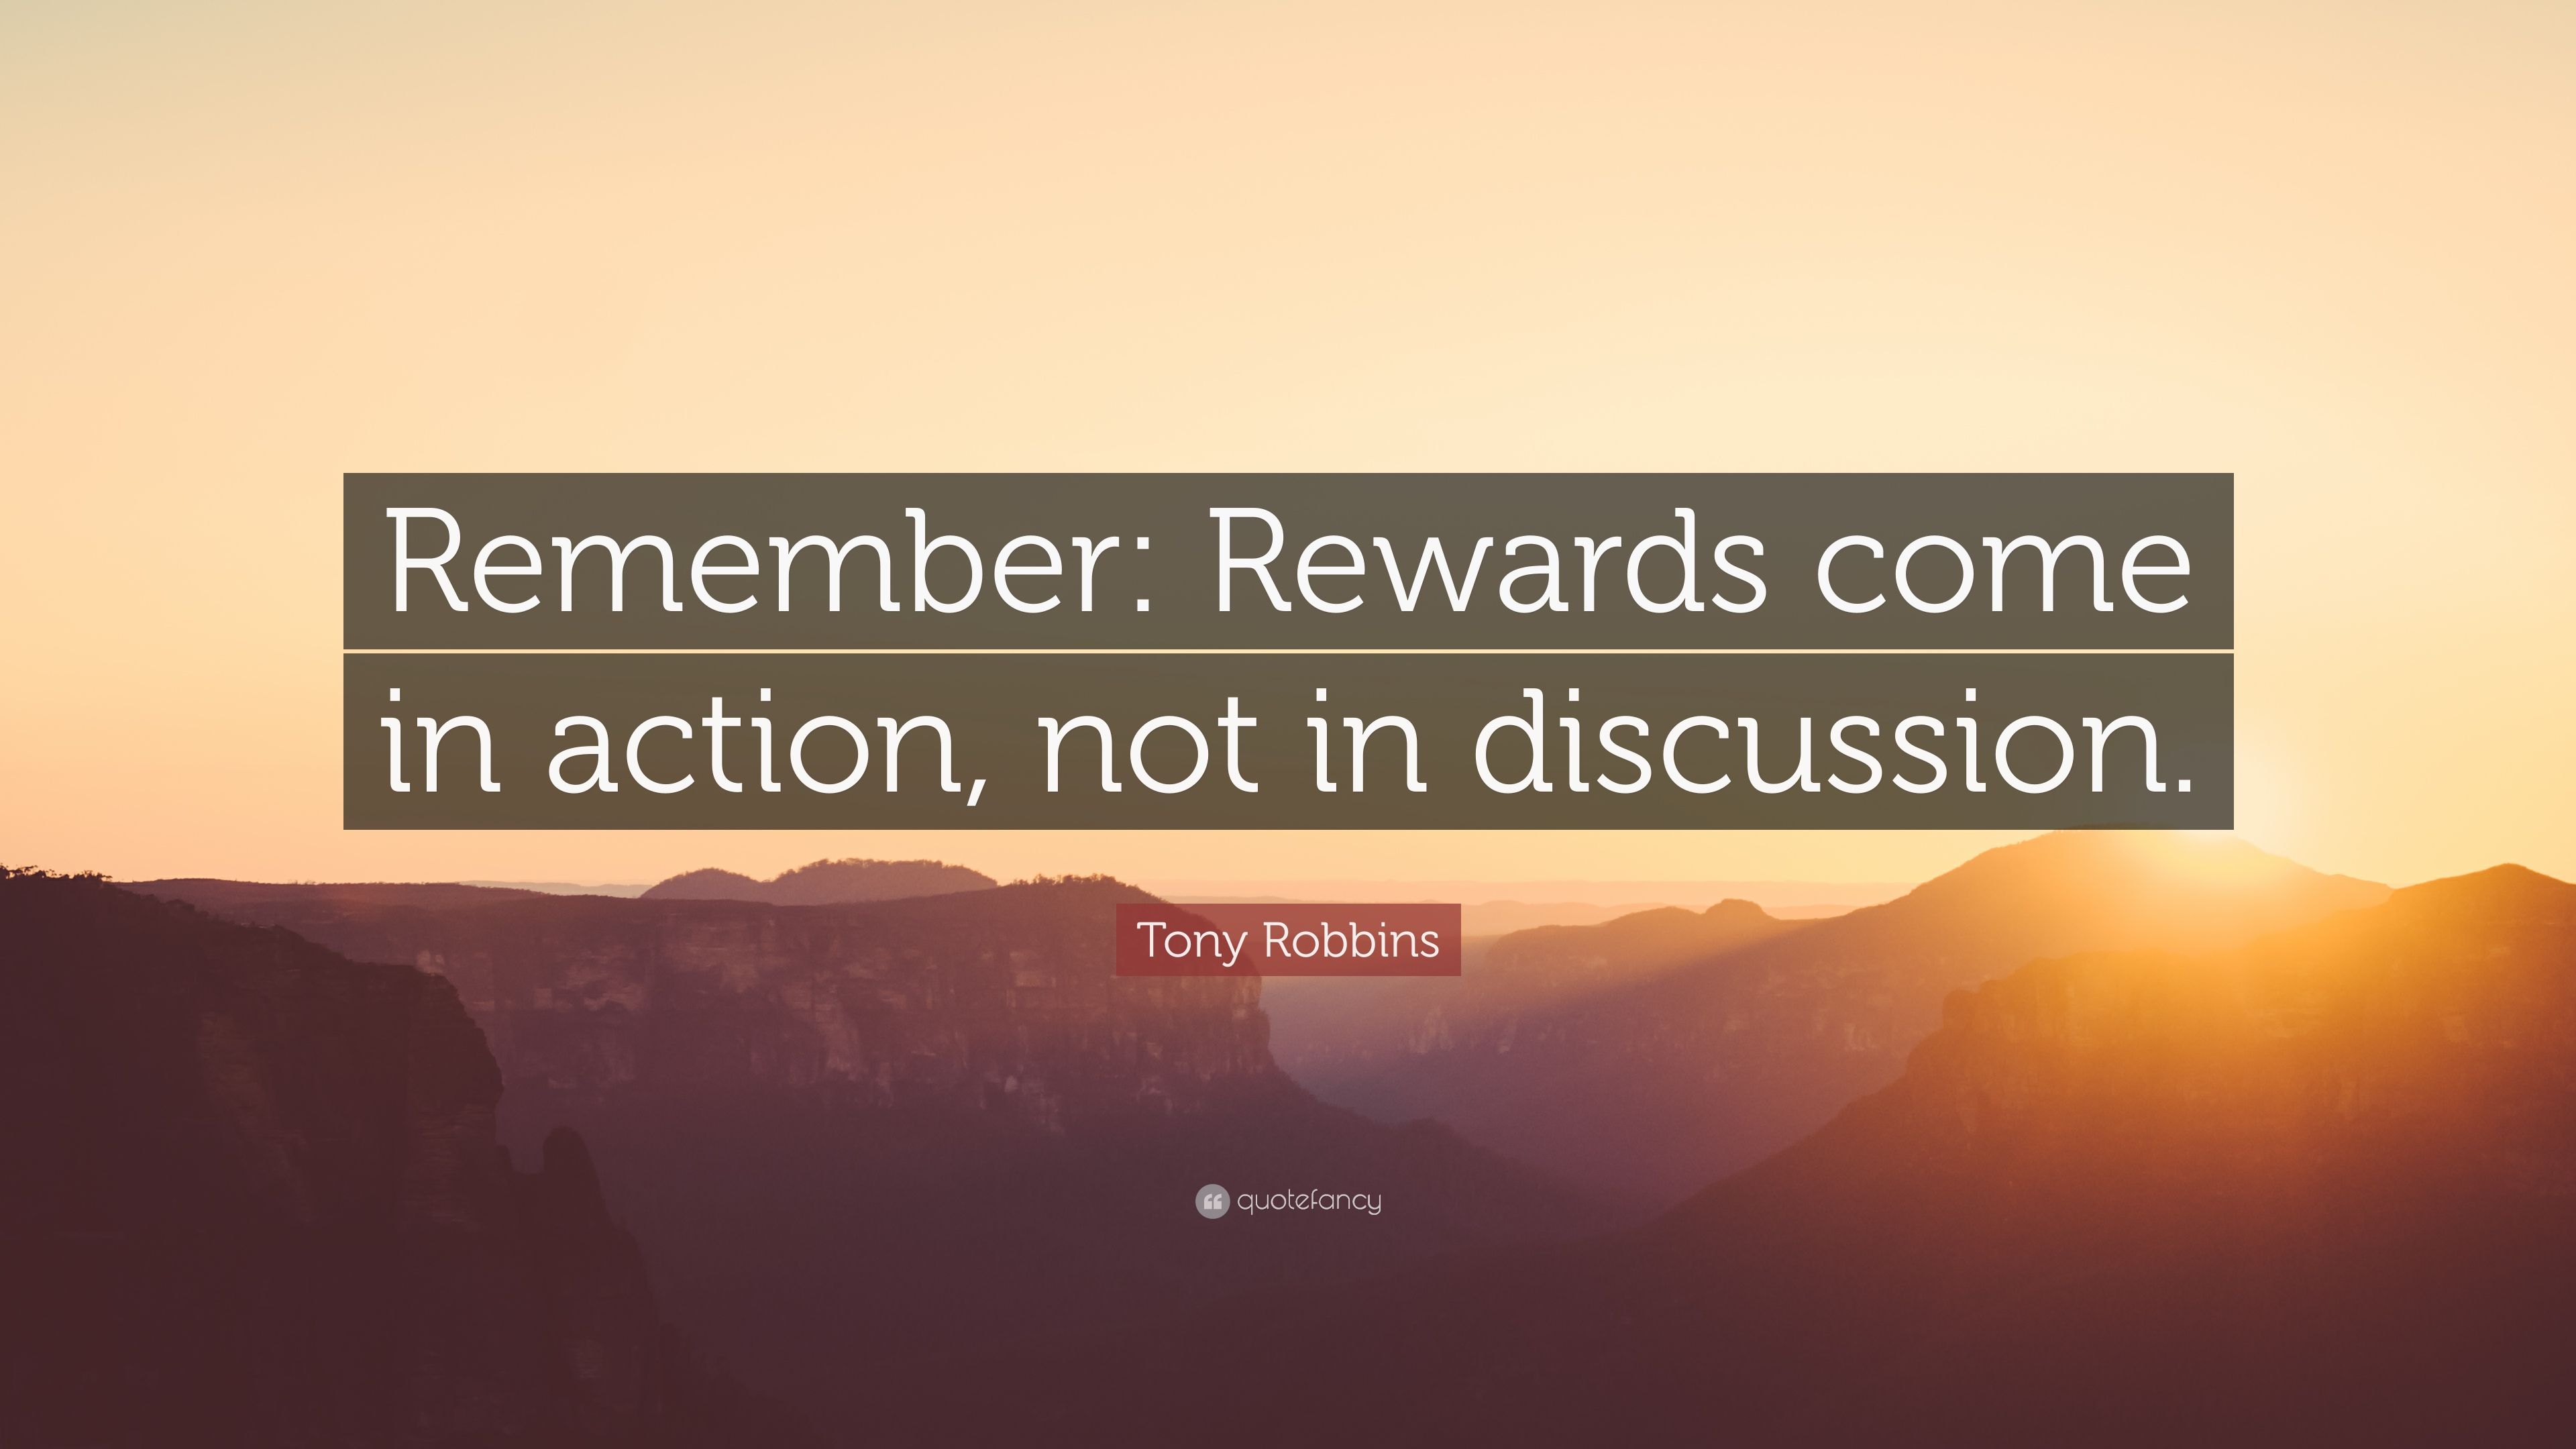 Tony Robbins Quote: “Remember: Rewards come in action, not